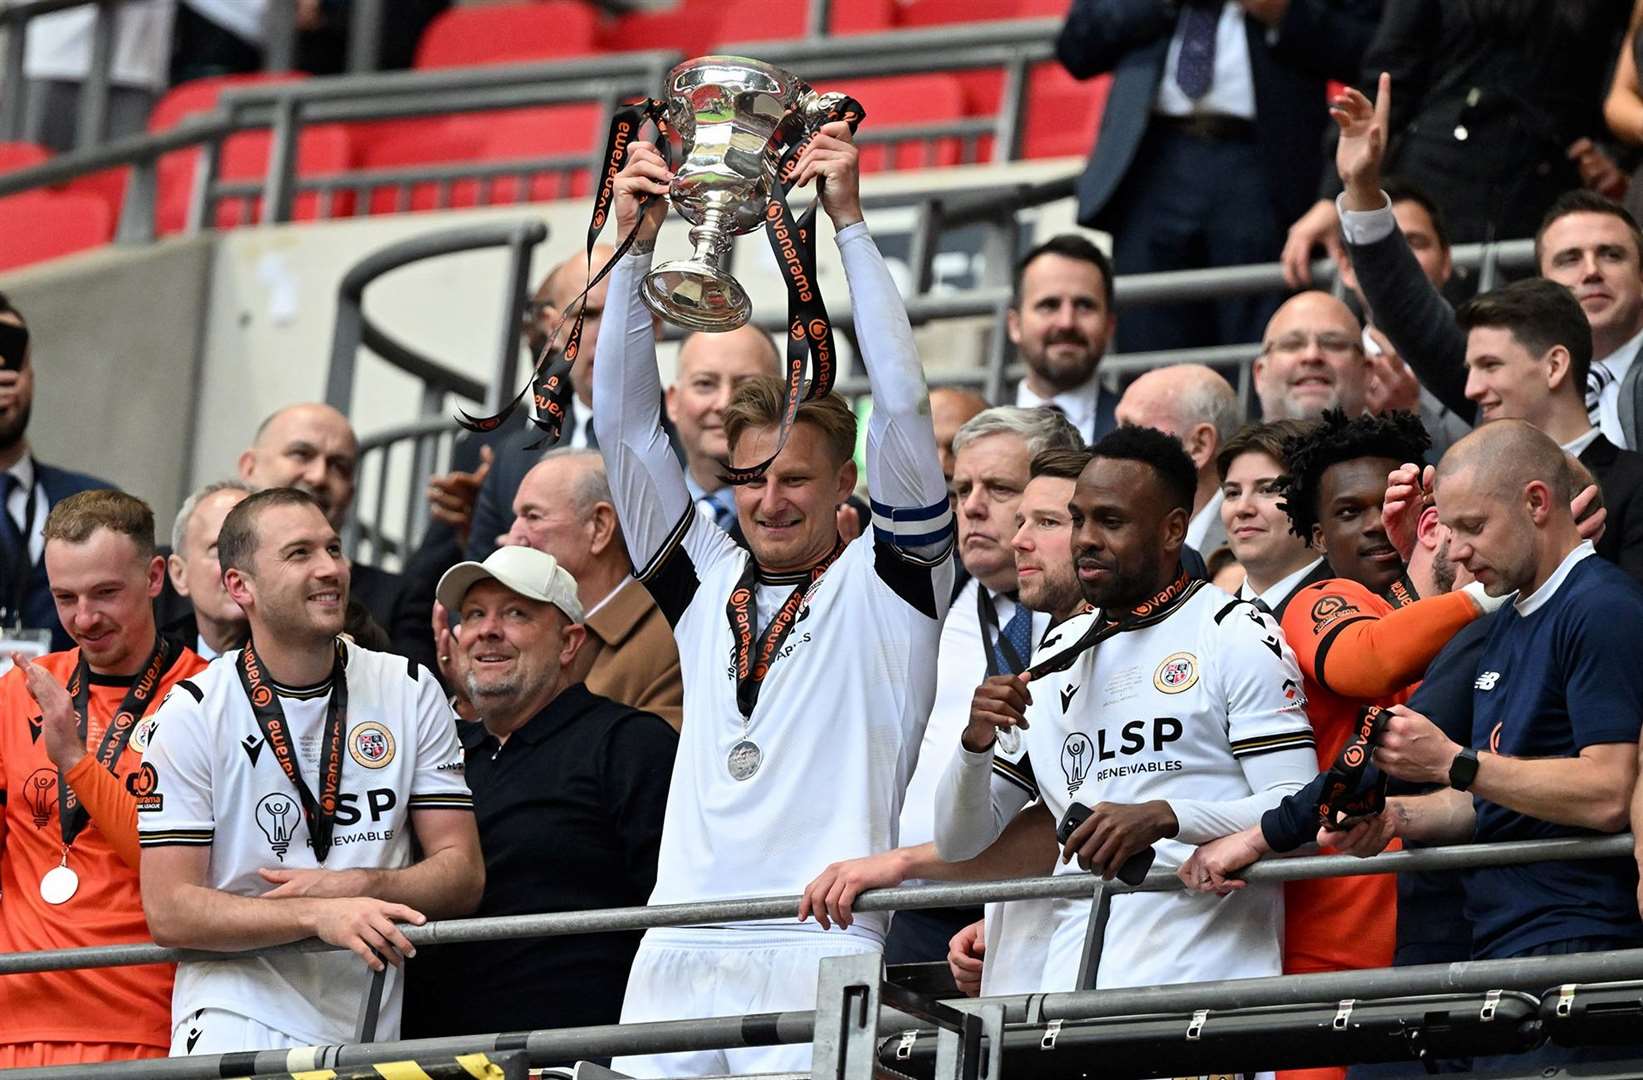 Former Bromley midfielder Luke Coulson missed the chance to watch his old team-mates seal promotion to the Football League for the first time in their history at the weekend. But he did speak to Byron Webster, pictured, and Michael Cheek on the day of the game